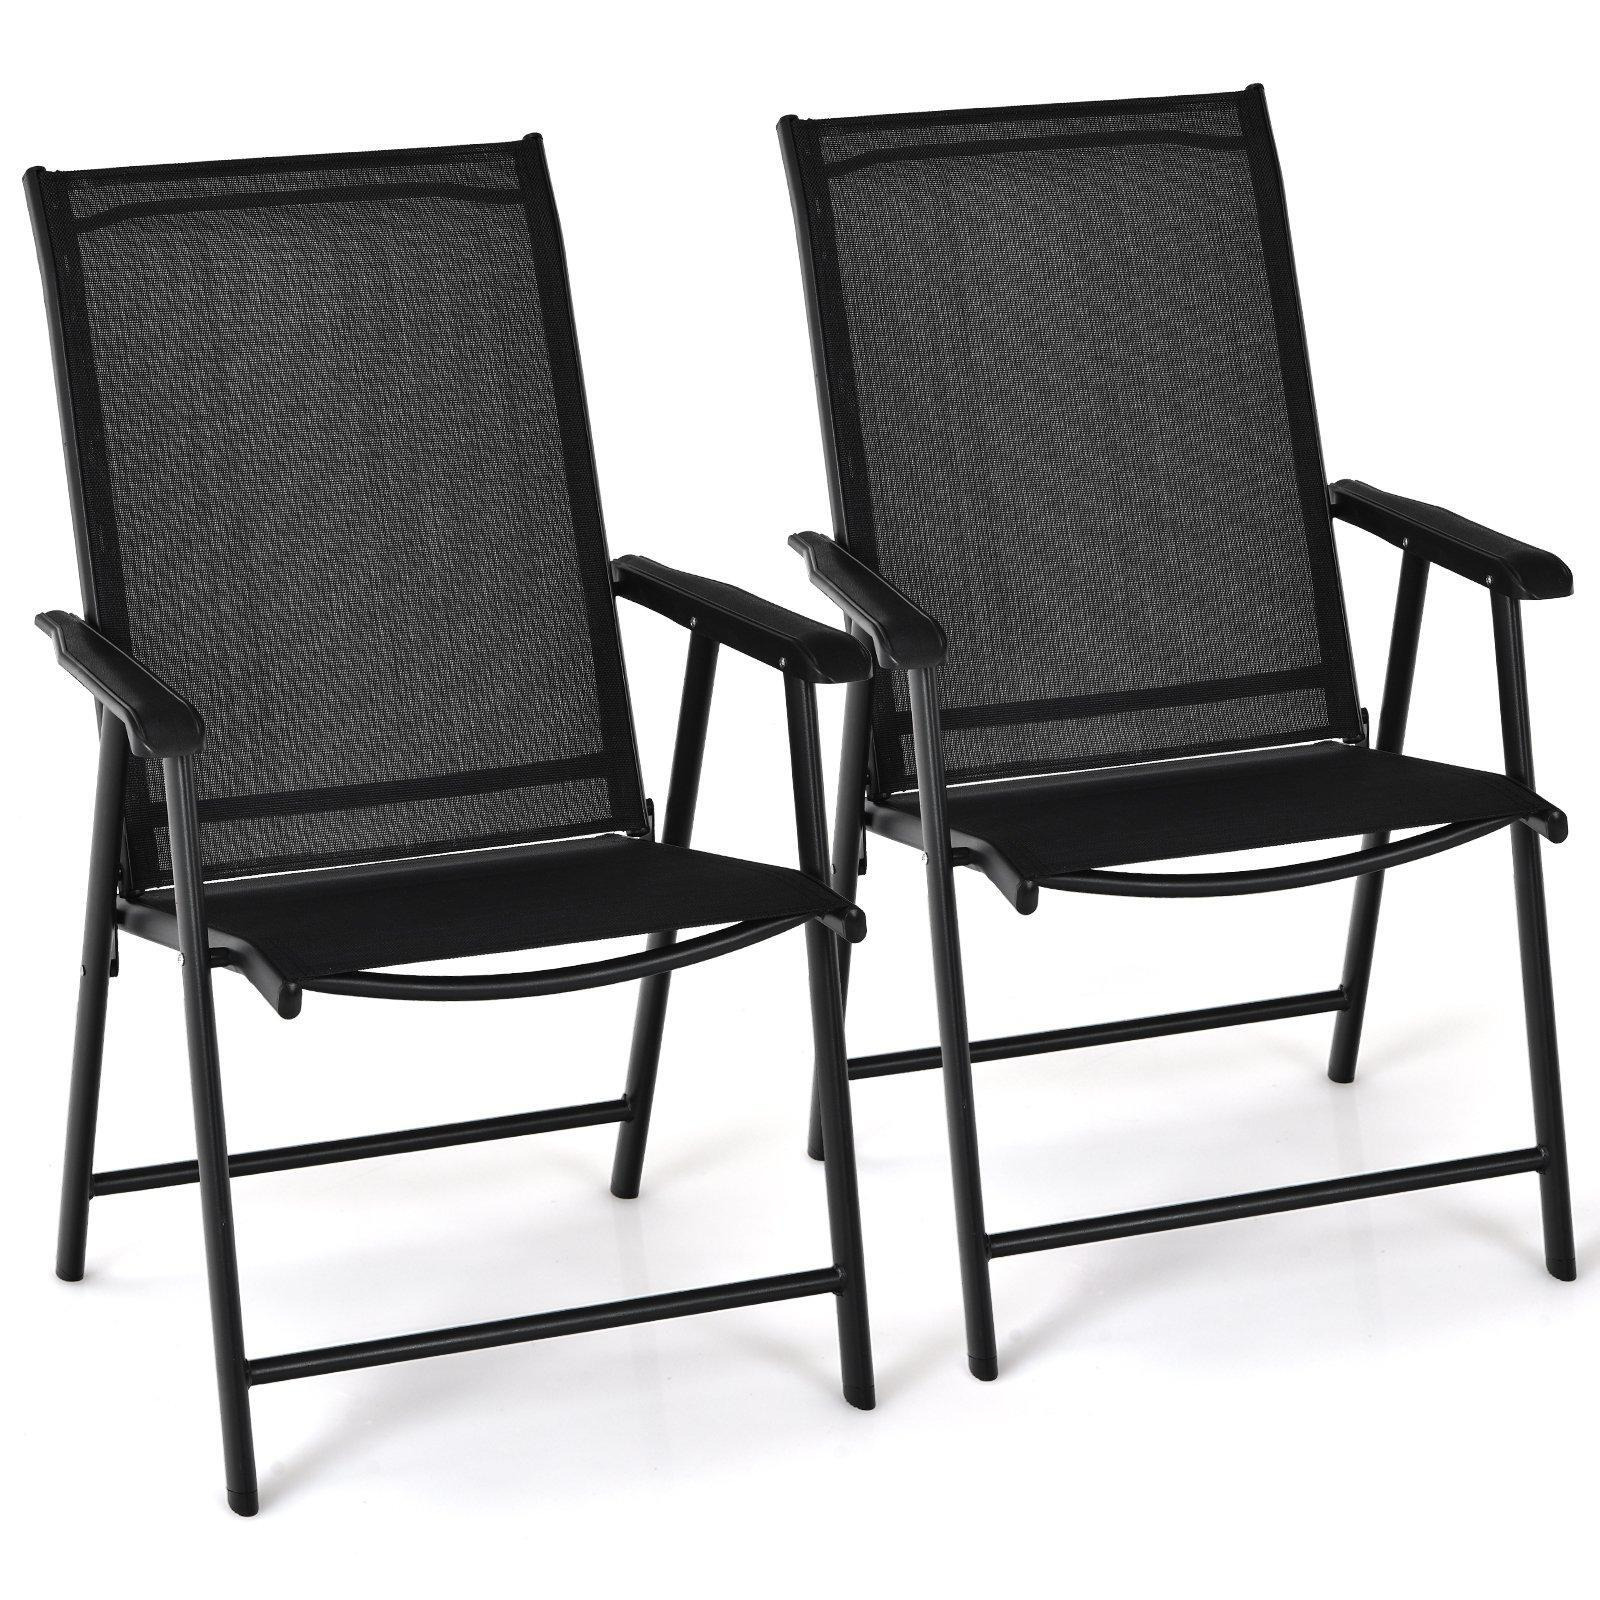 Set of 2 Folding Chairs Outdoor Dining Garden Chairs Armchair with Armrests - image 1